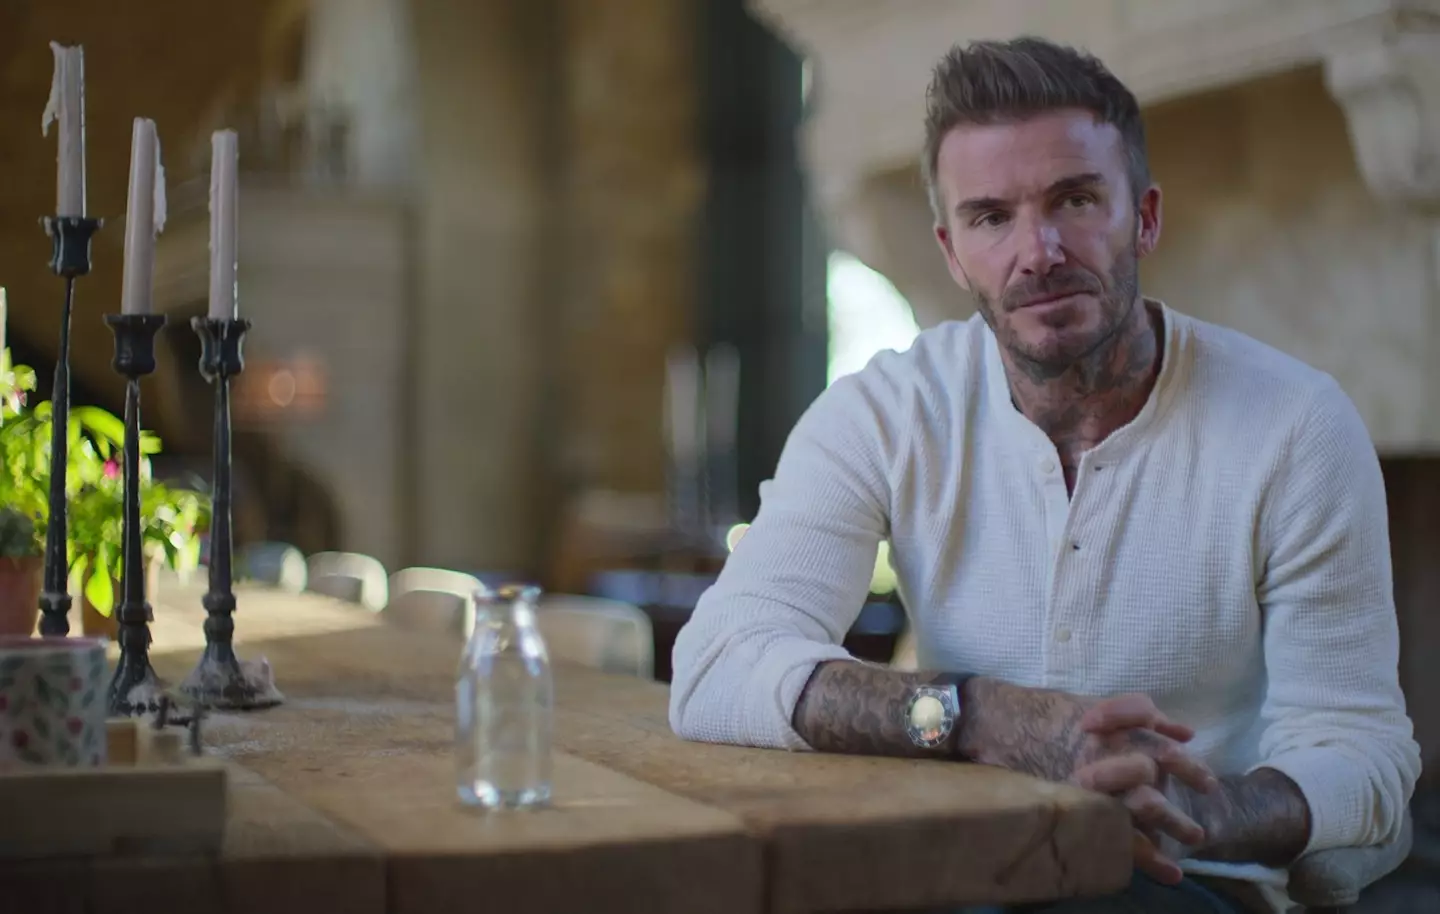 David Beckham opened up on his life and career in the new Netflix series.